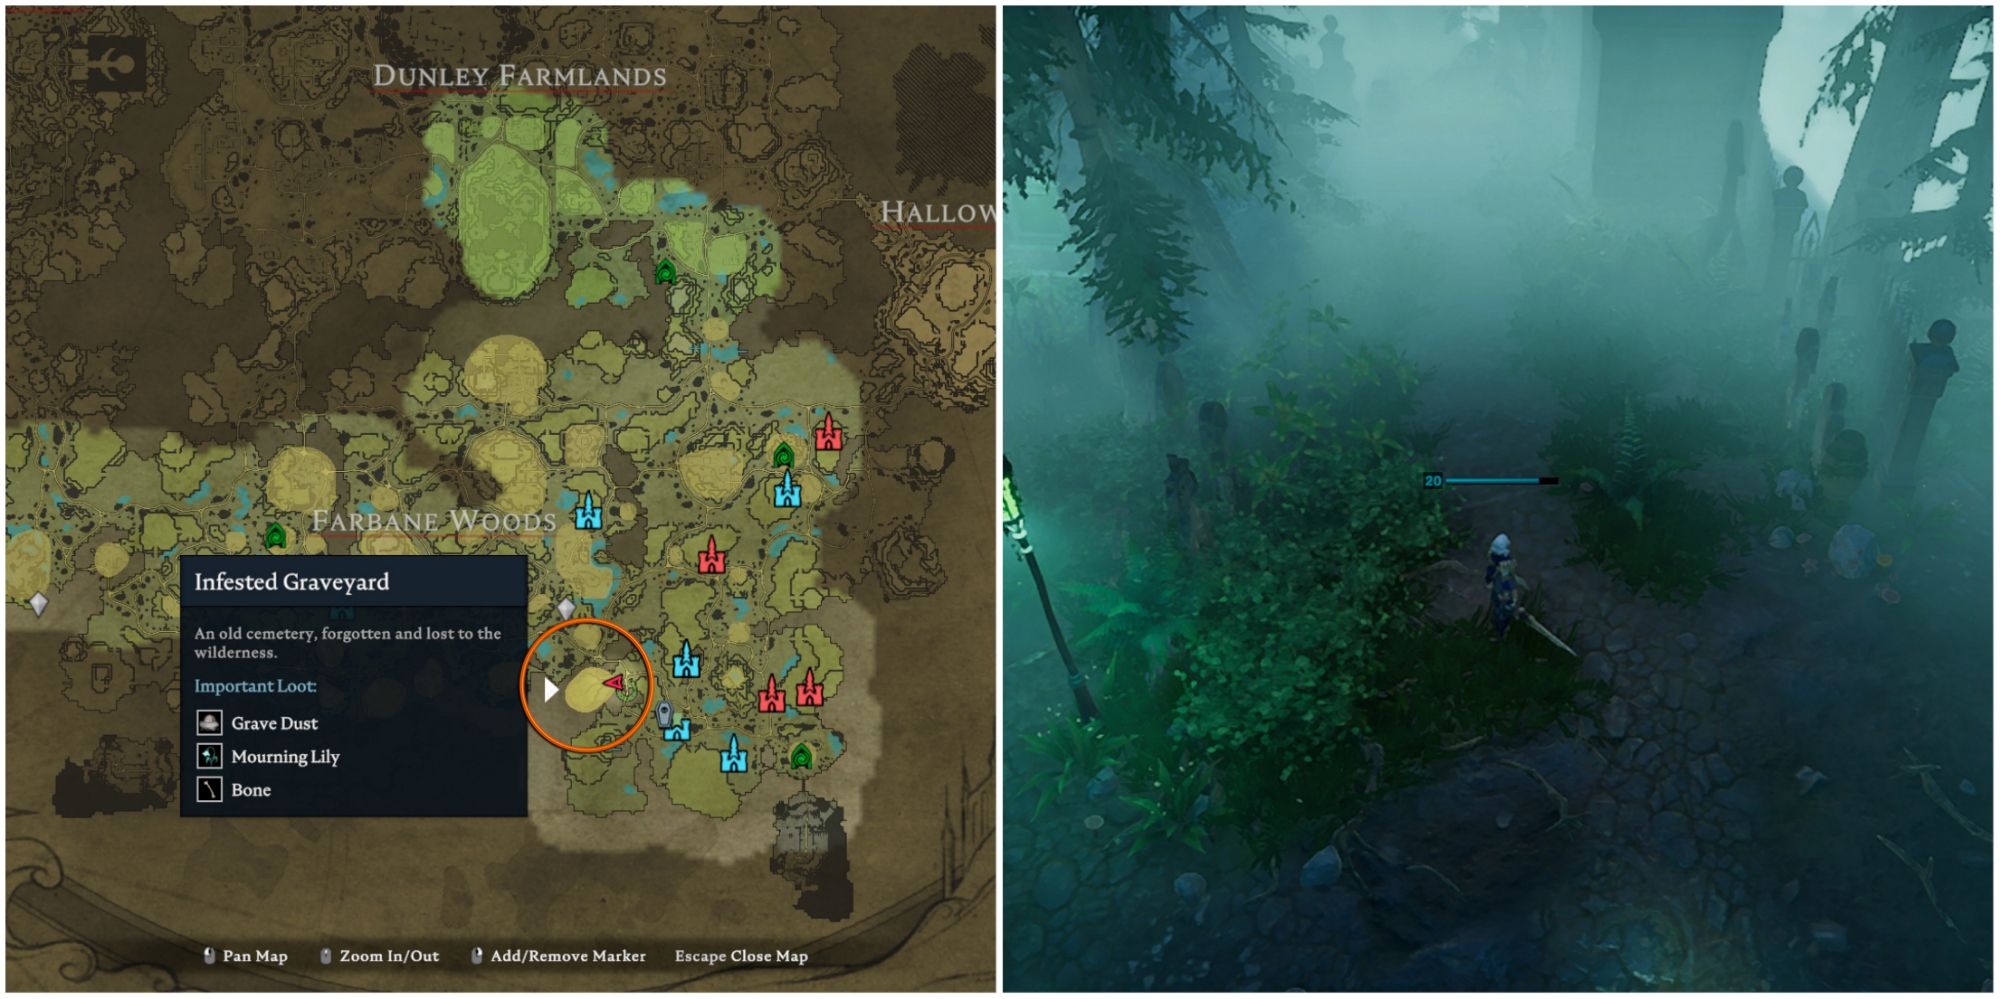 Split image of V Rising map with Infested Graveyard circled in orange, and a player standing in eerie graveyard with sword drawn